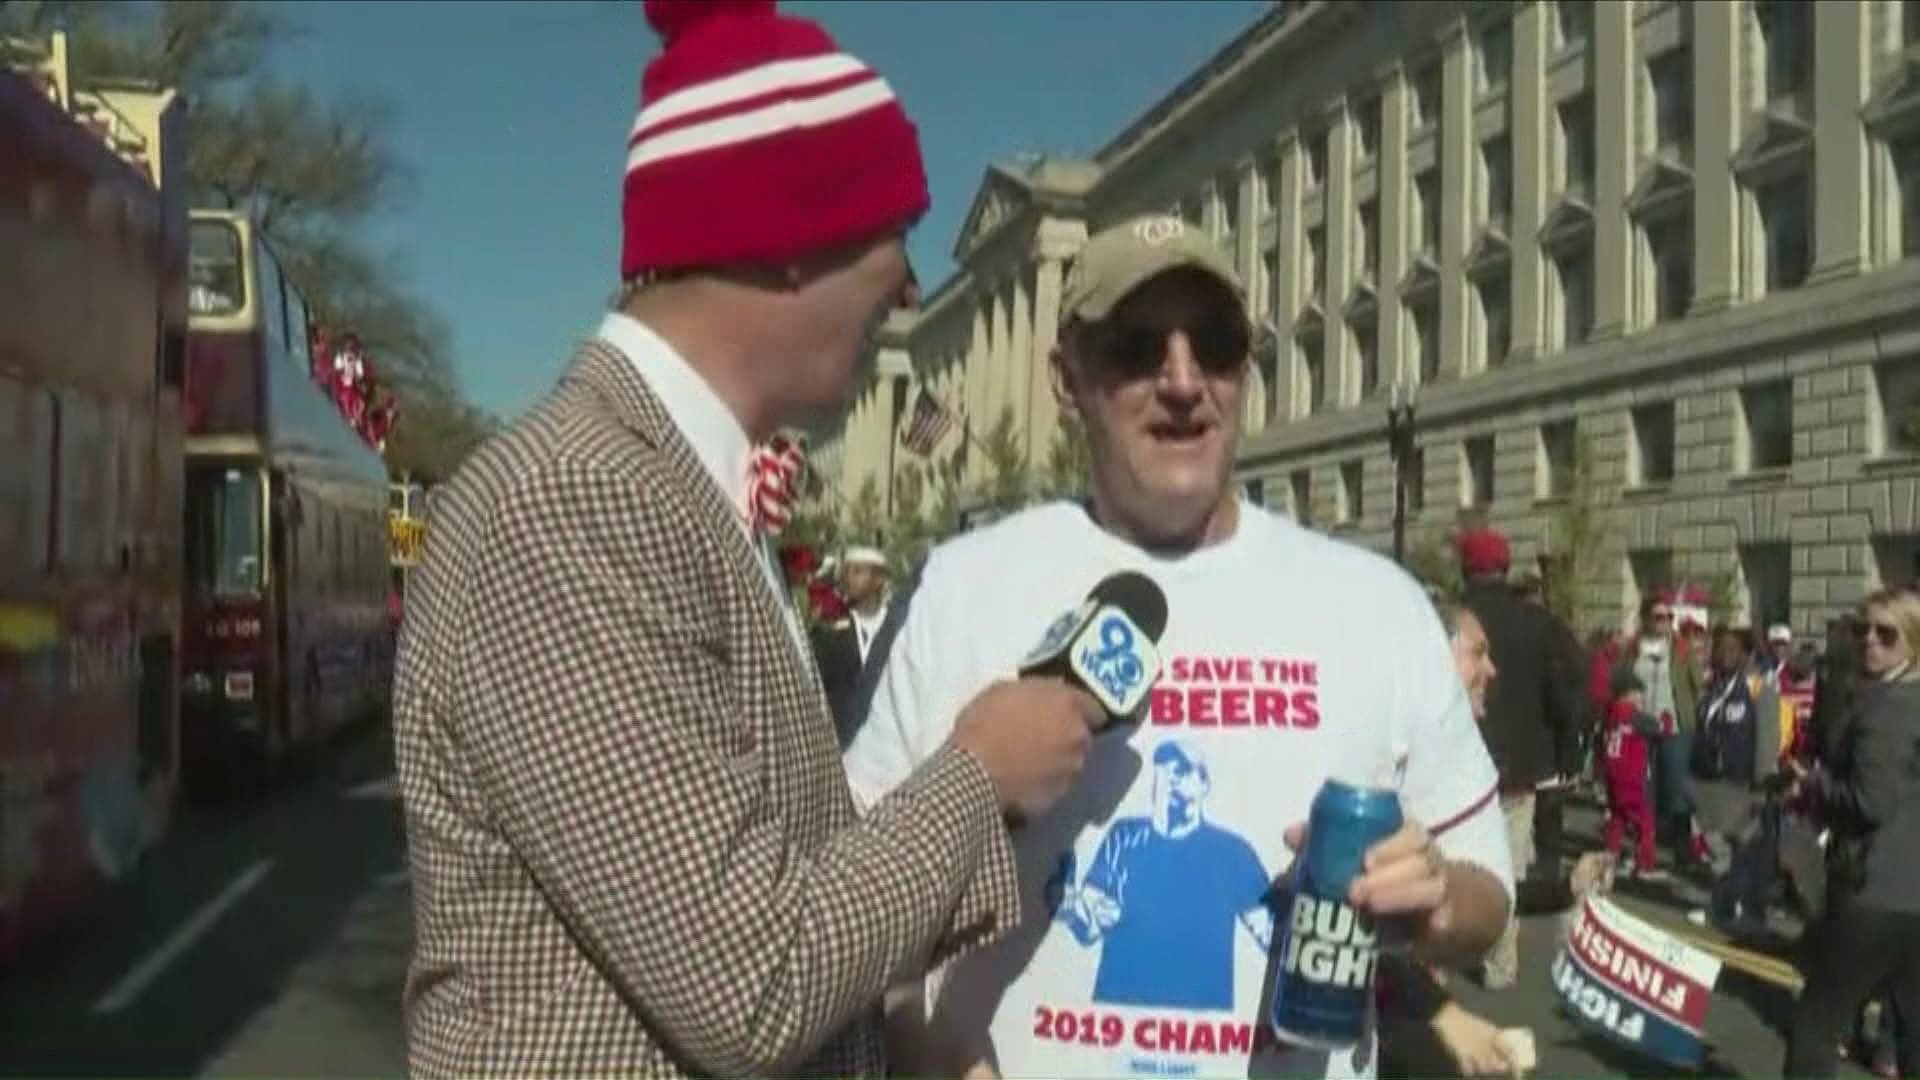 Nationals fan, and defender of beers, Jeff Adams will ride on a float in the Nationals victory parade.